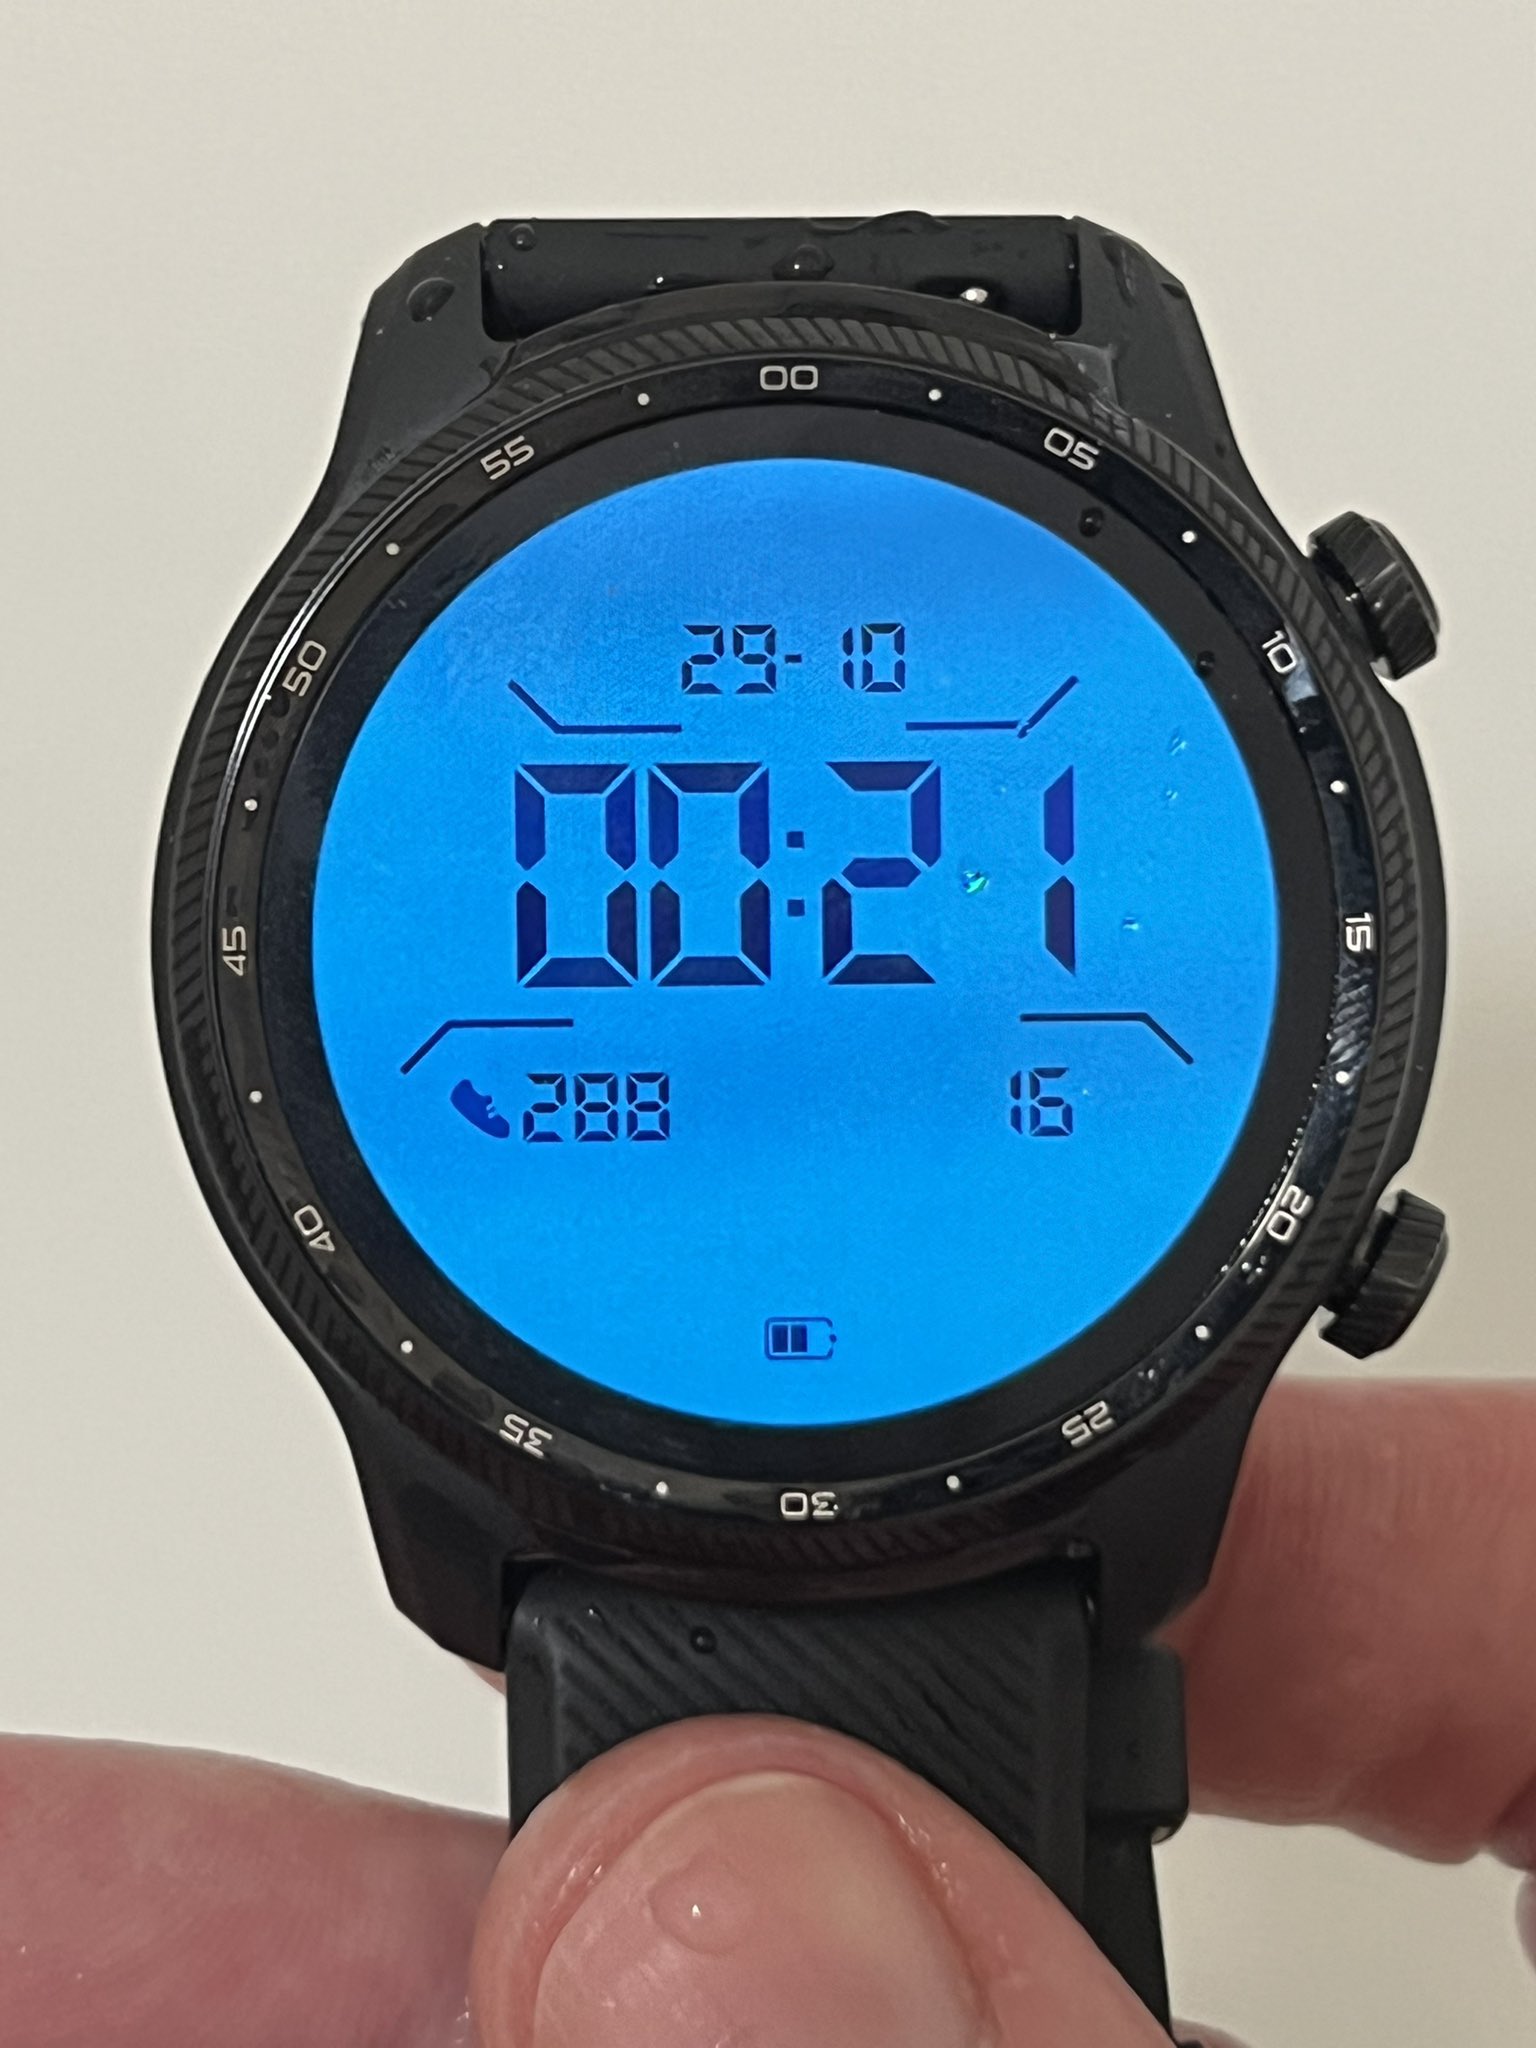 Mobvoi TicWatch Pro 3 Ultra GPS smartwatch review